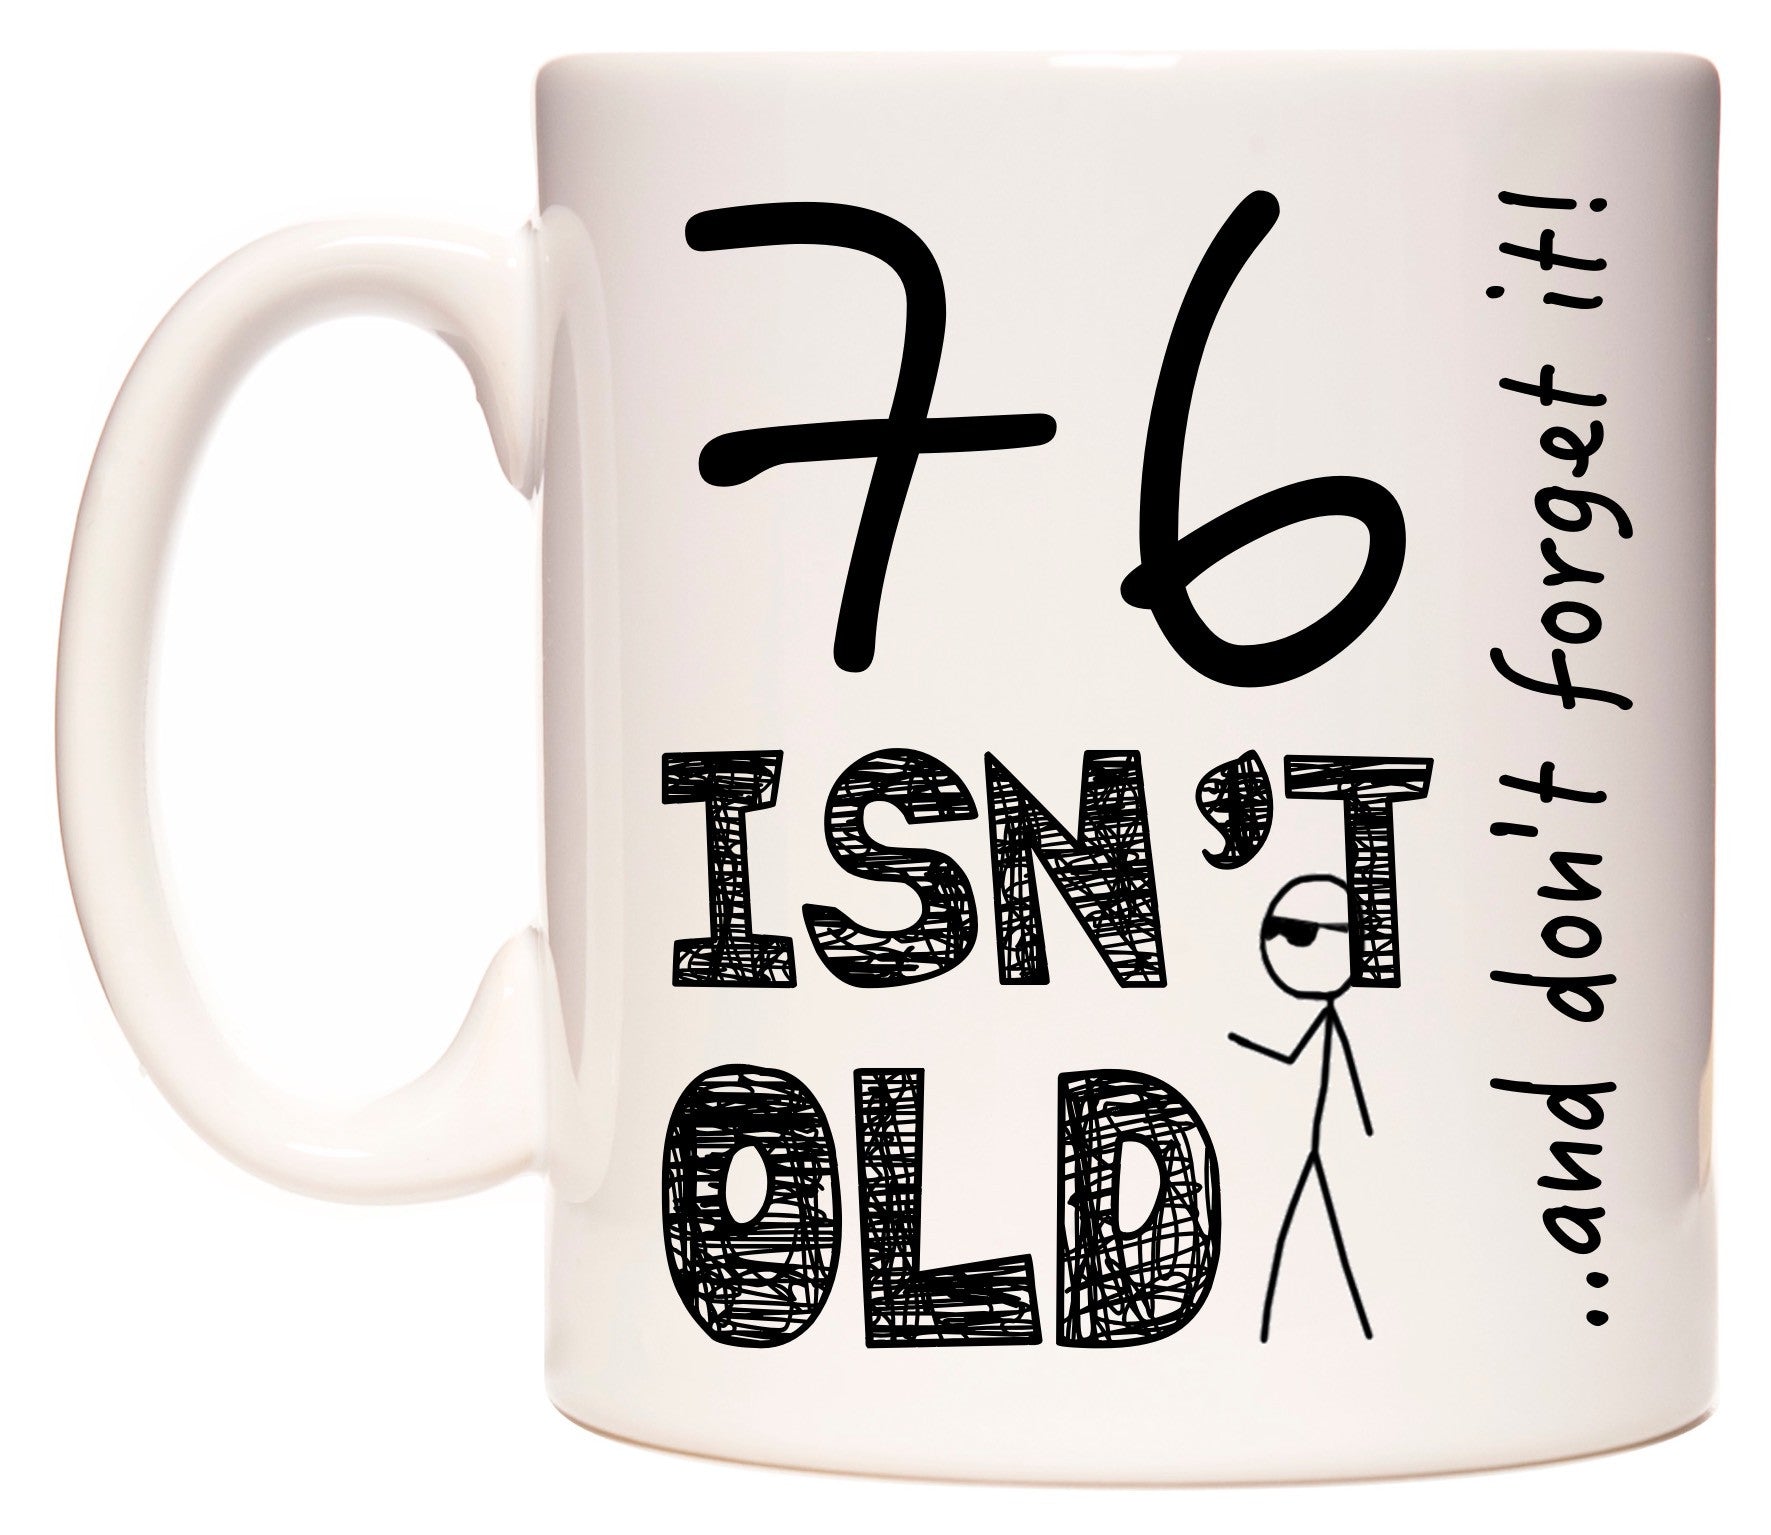 This mug features 76 Isn't Old